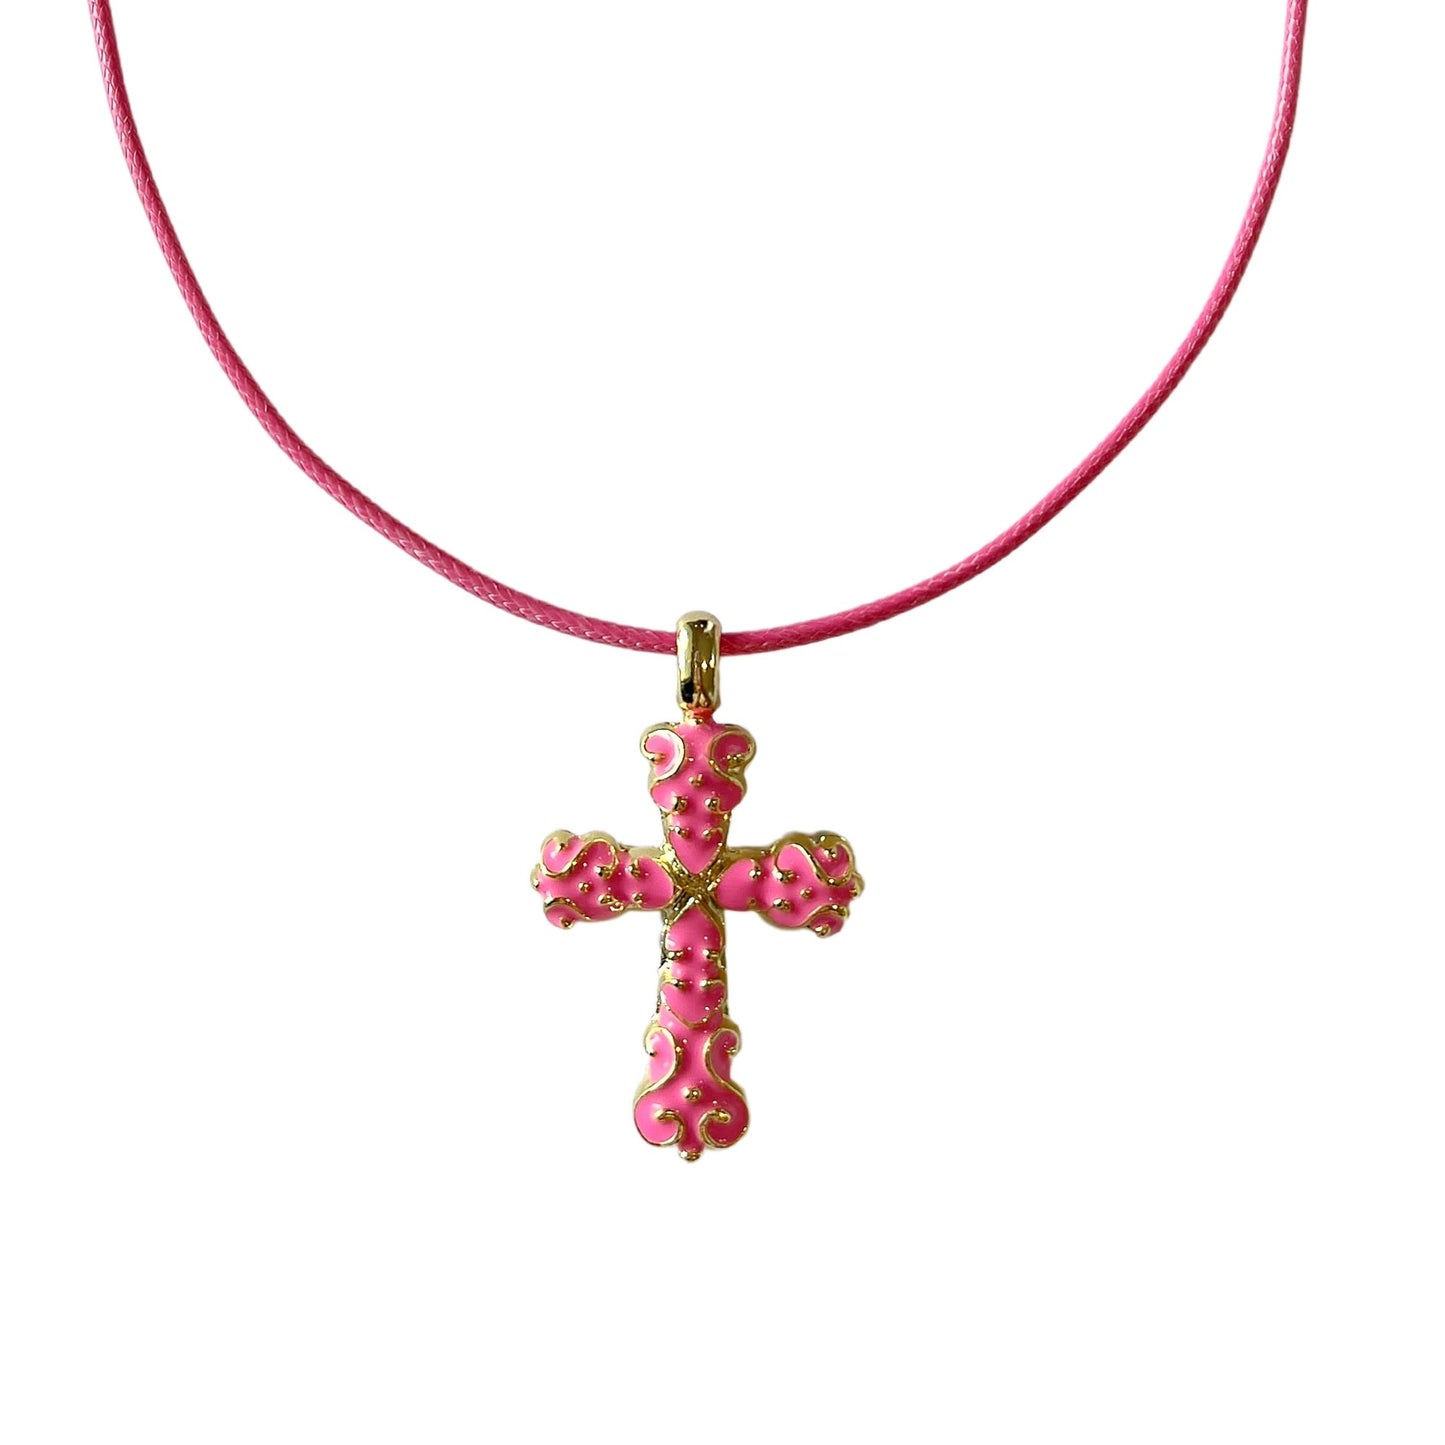 HOLY CRUSH NECKLACE - CANDY